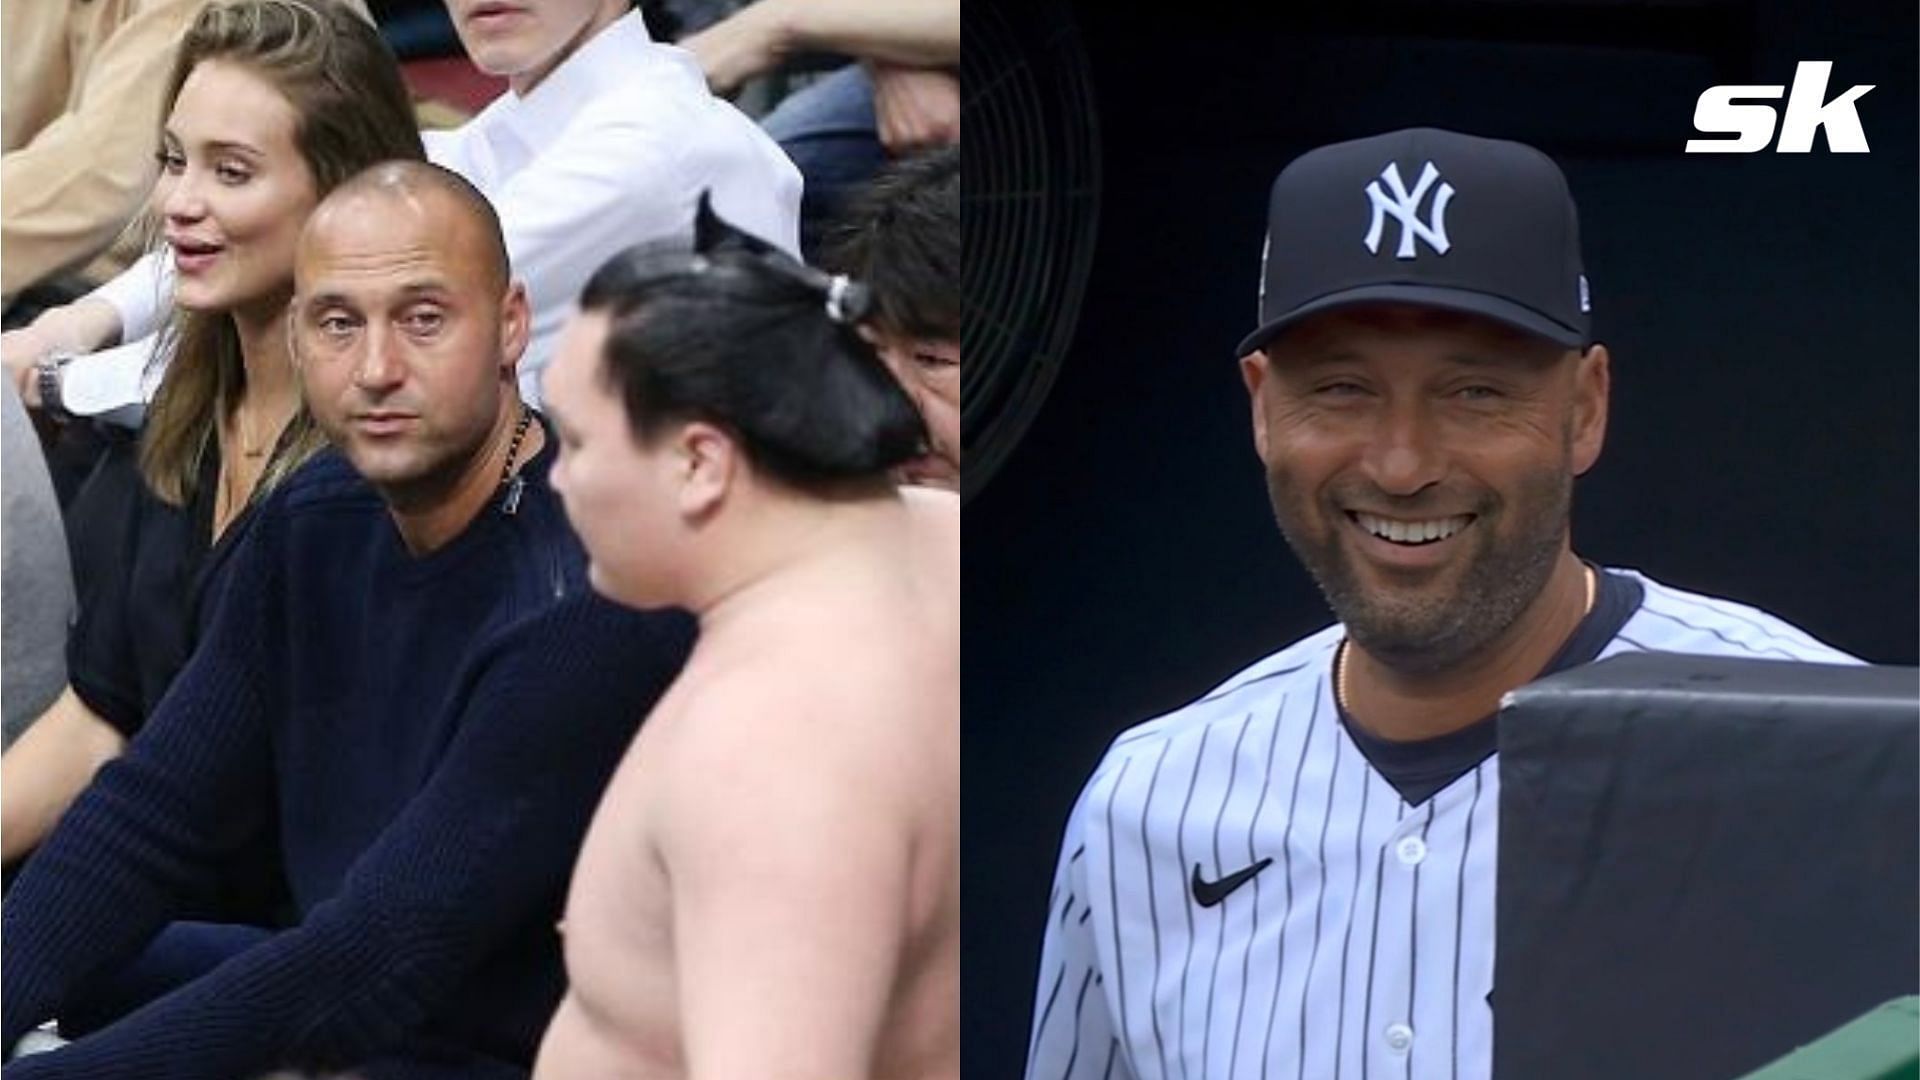 The ultra-famous Derek Jeter once went unrecognized at a sumo wrestling event in Japan